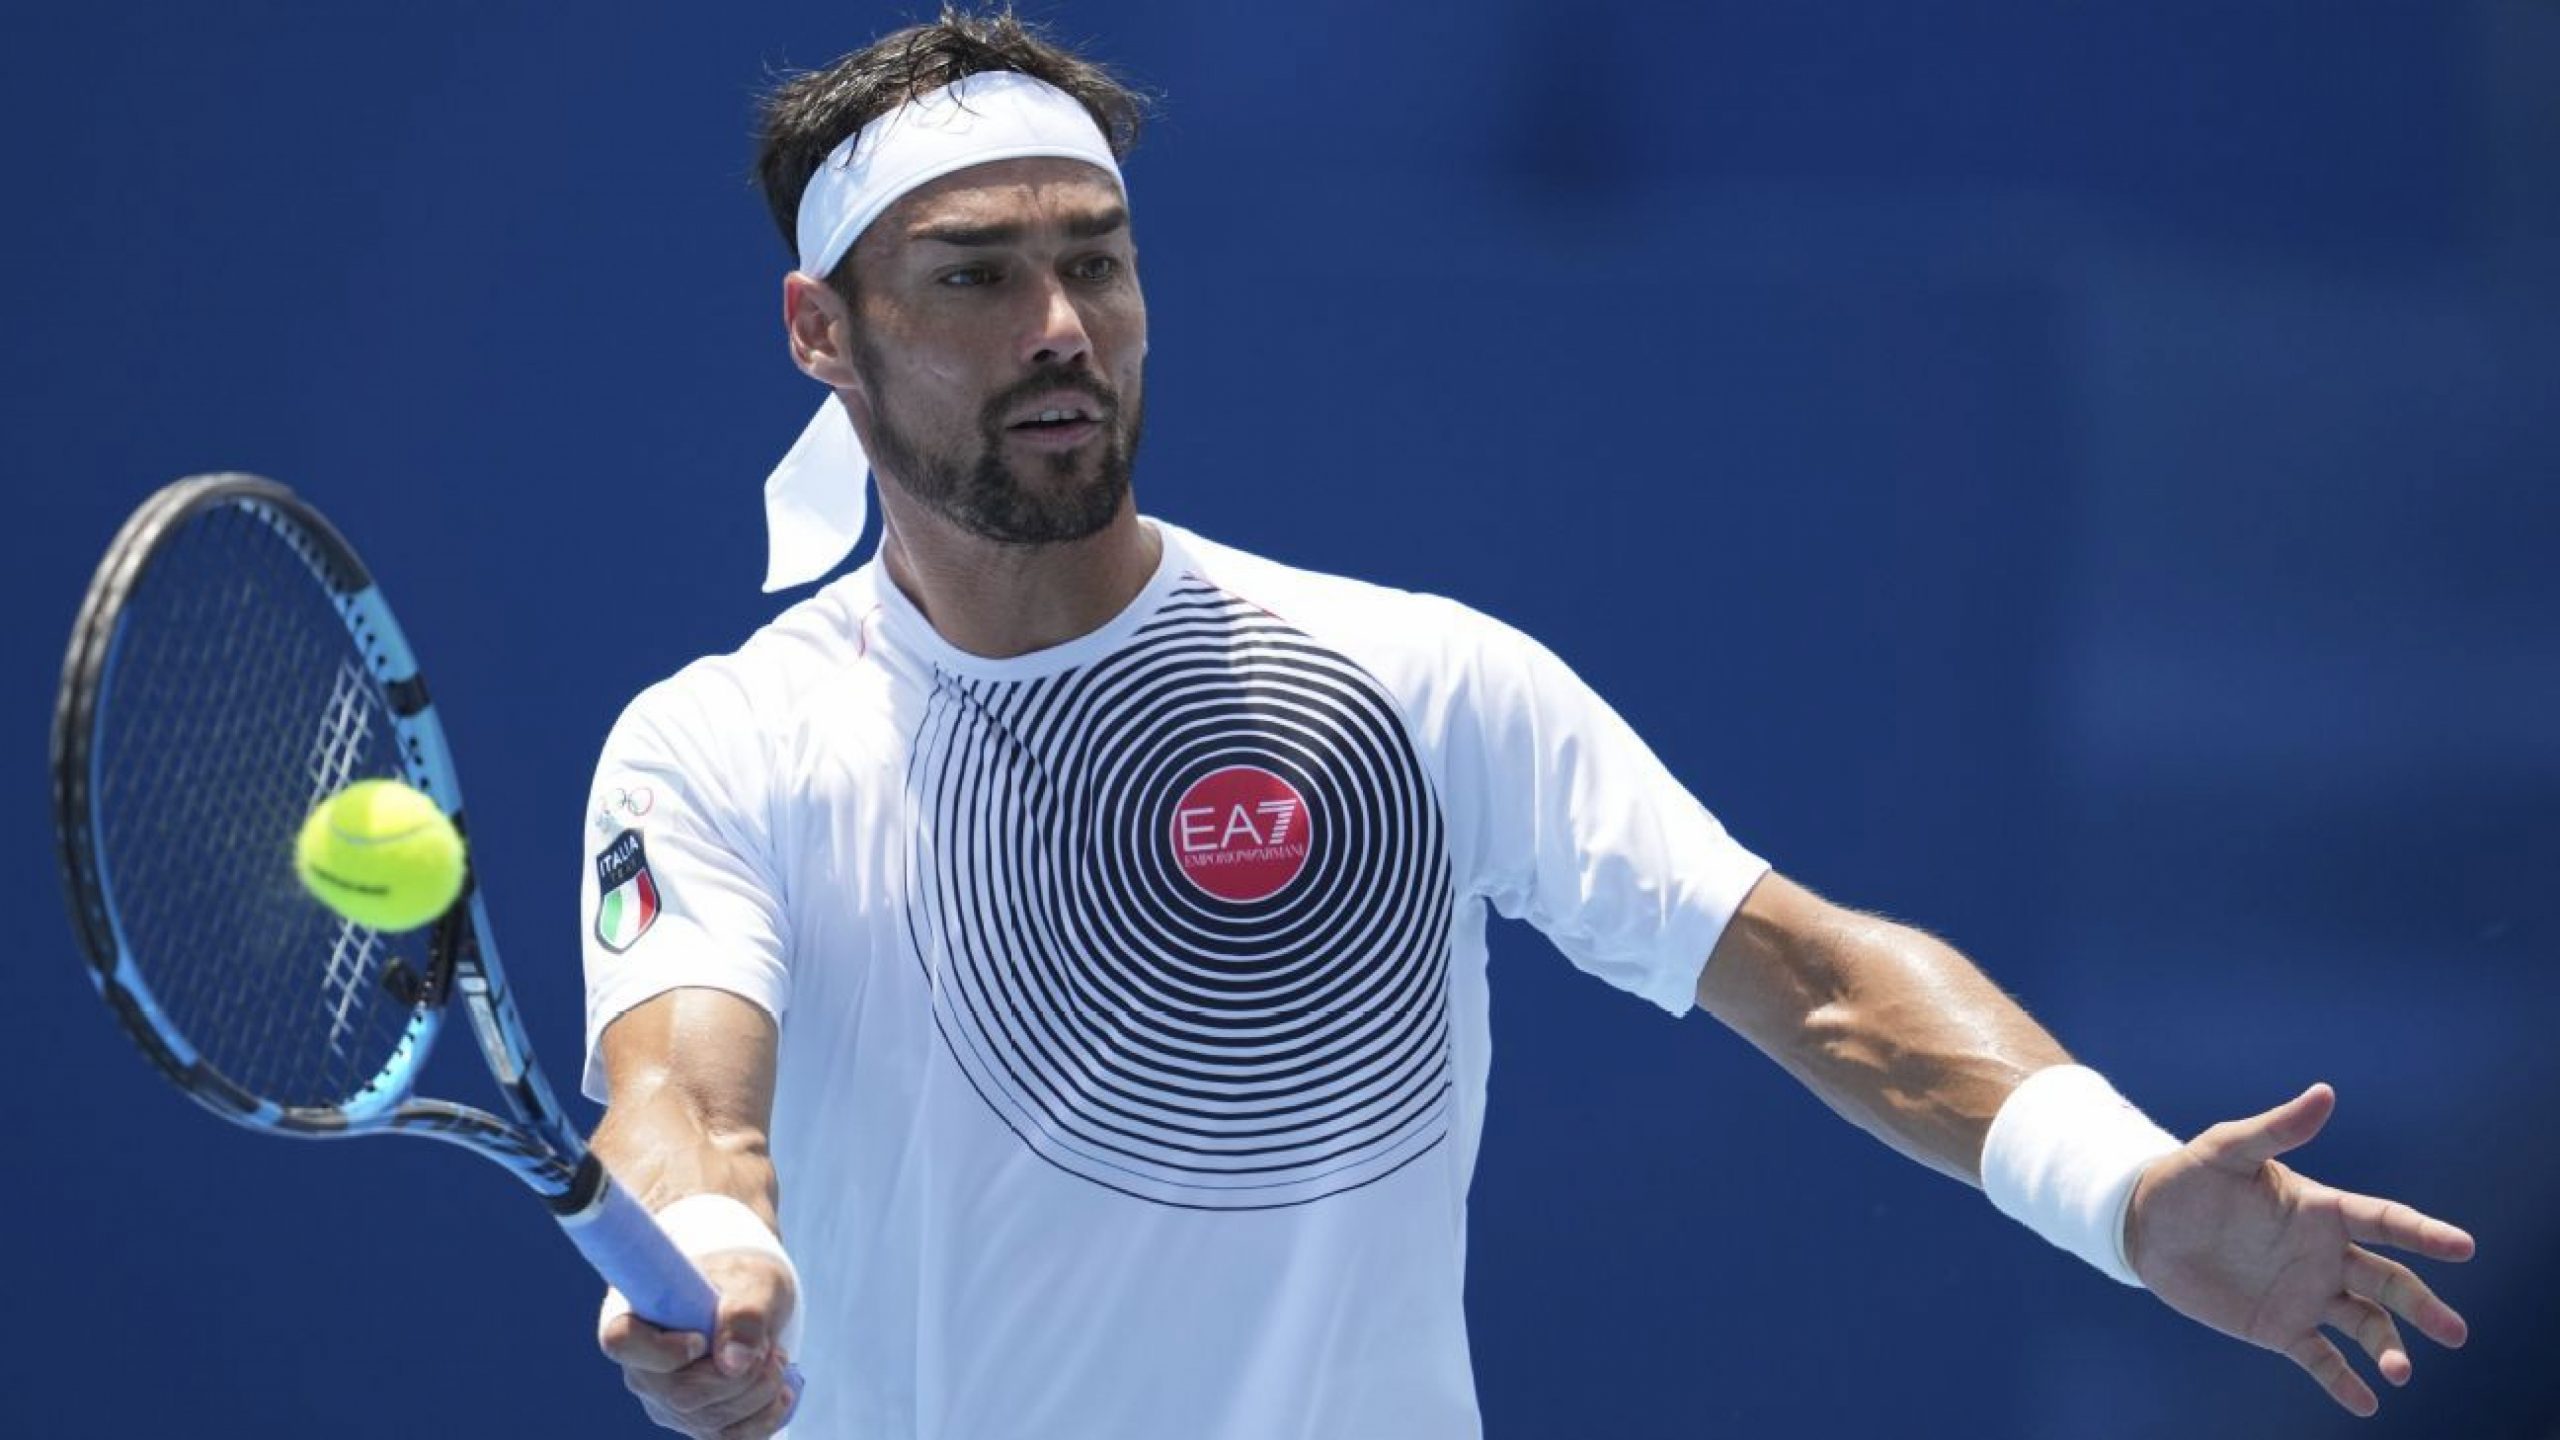 Fognini sorry for anti-gay slur used in tennis loss